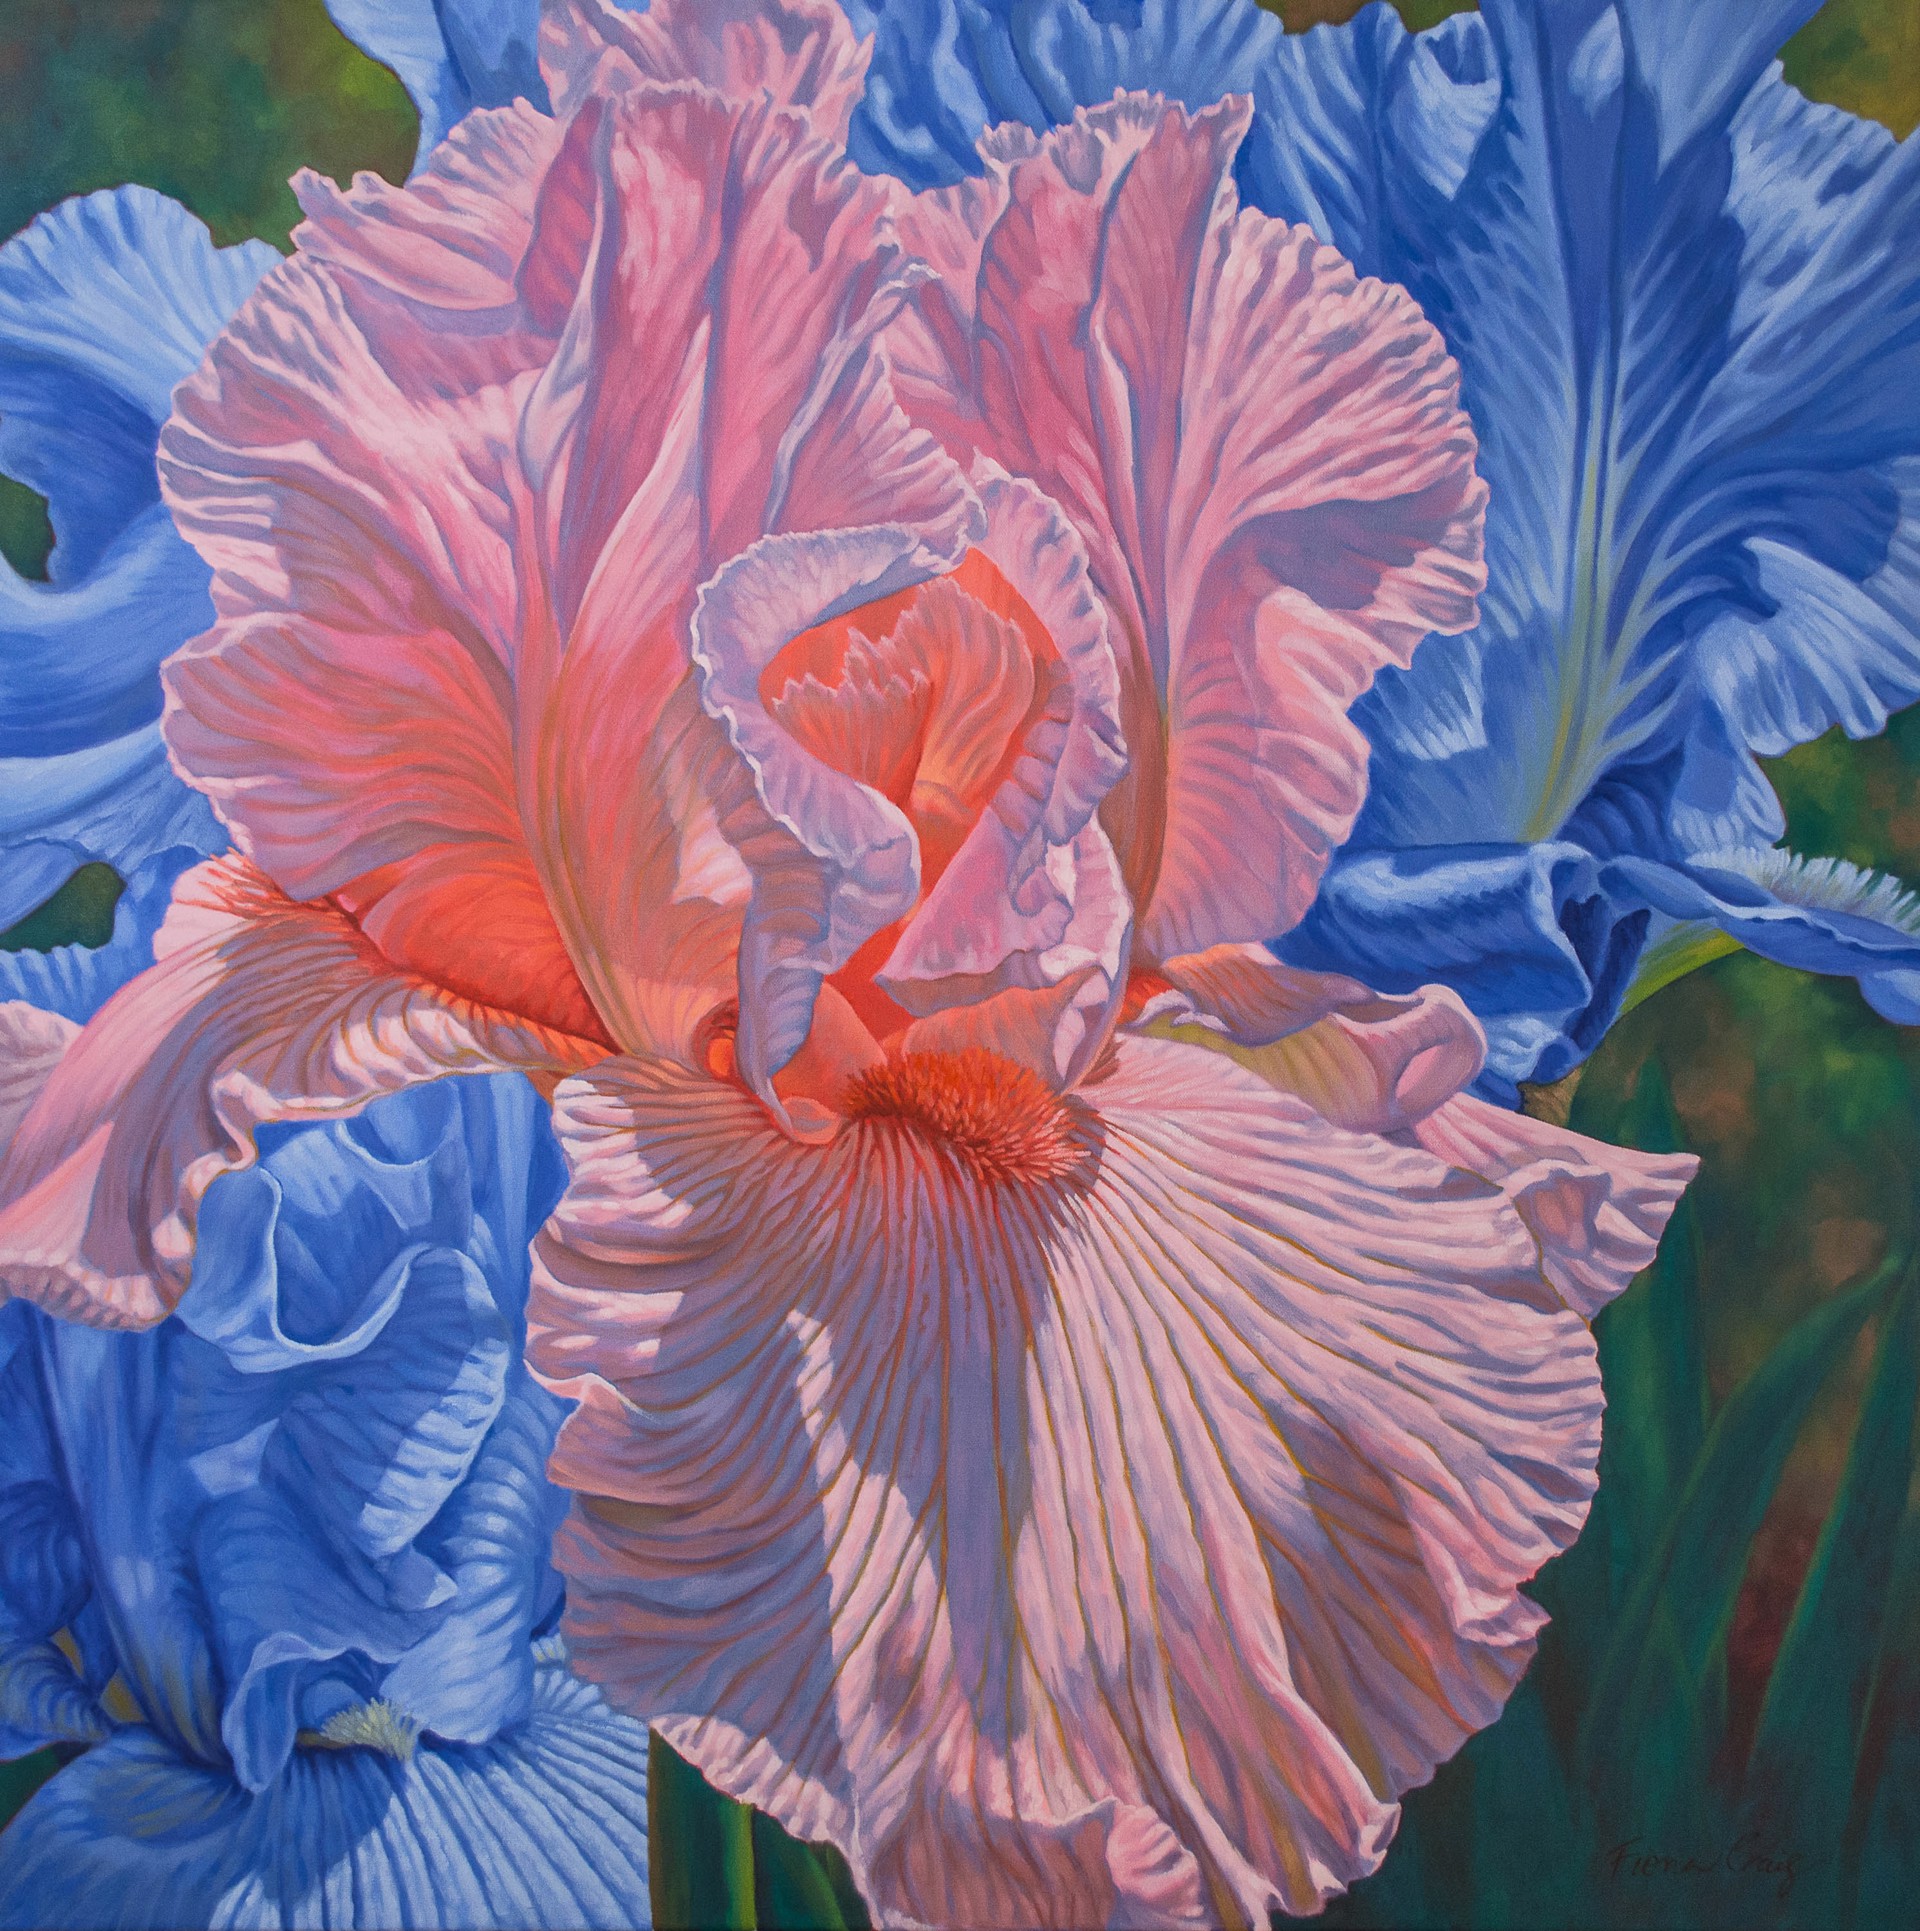 Floral Scape 1; Pink and Blue Irises by Fiona Craig